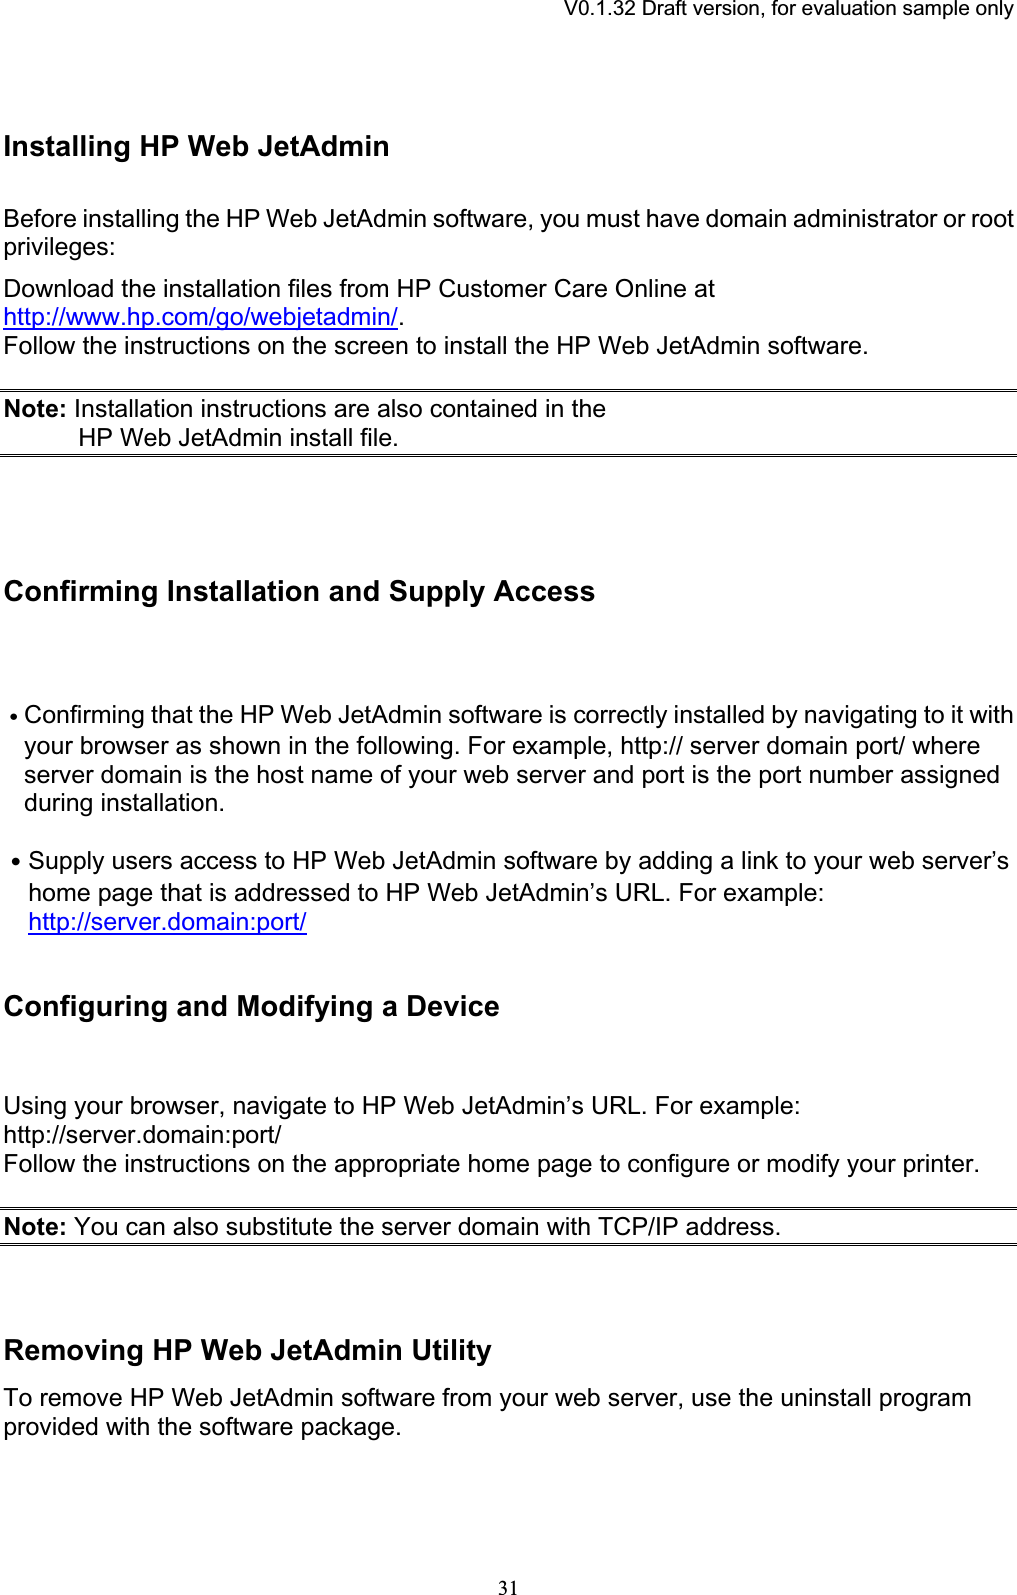 V0.1.32 Draft version, for evaluation sample onlyInstalling HP Web JetAdmin Before installing the HP Web JetAdmin software, you must have domain administrator or root privileges:Download the installation files from HP Customer Care Online at http://www.hp.com/go/webjetadmin/.Follow the instructions on the screen to install the HP Web JetAdmin software. Note: Installation instructions are also contained in the HP Web JetAdmin install file. Confirming Installation and Supply AccessԦConfirming that the HP Web JetAdmin software is correctly installed by navigating to it with your browser as shown in the following. For example, http:// server domain port/ where server domain is the host name of your web server and port is the port number assigned during installation. ԦSupply users access to HP Web JetAdmin software by adding a link to your web server’s home page that is addressed to HP Web JetAdmin’s URL. For example: http://server.domain:port/Configuring and Modifying a Device Using your browser, navigate to HP Web JetAdmin’s URL. For example: http://server.domain:port/Follow the instructions on the appropriate home page to configure or modify your printer. Note: You can also substitute the server domain with TCP/IP address. Removing HP Web JetAdmin UtilityTo remove HP Web JetAdmin software from your web server, use the uninstall program provided with the software package. 31